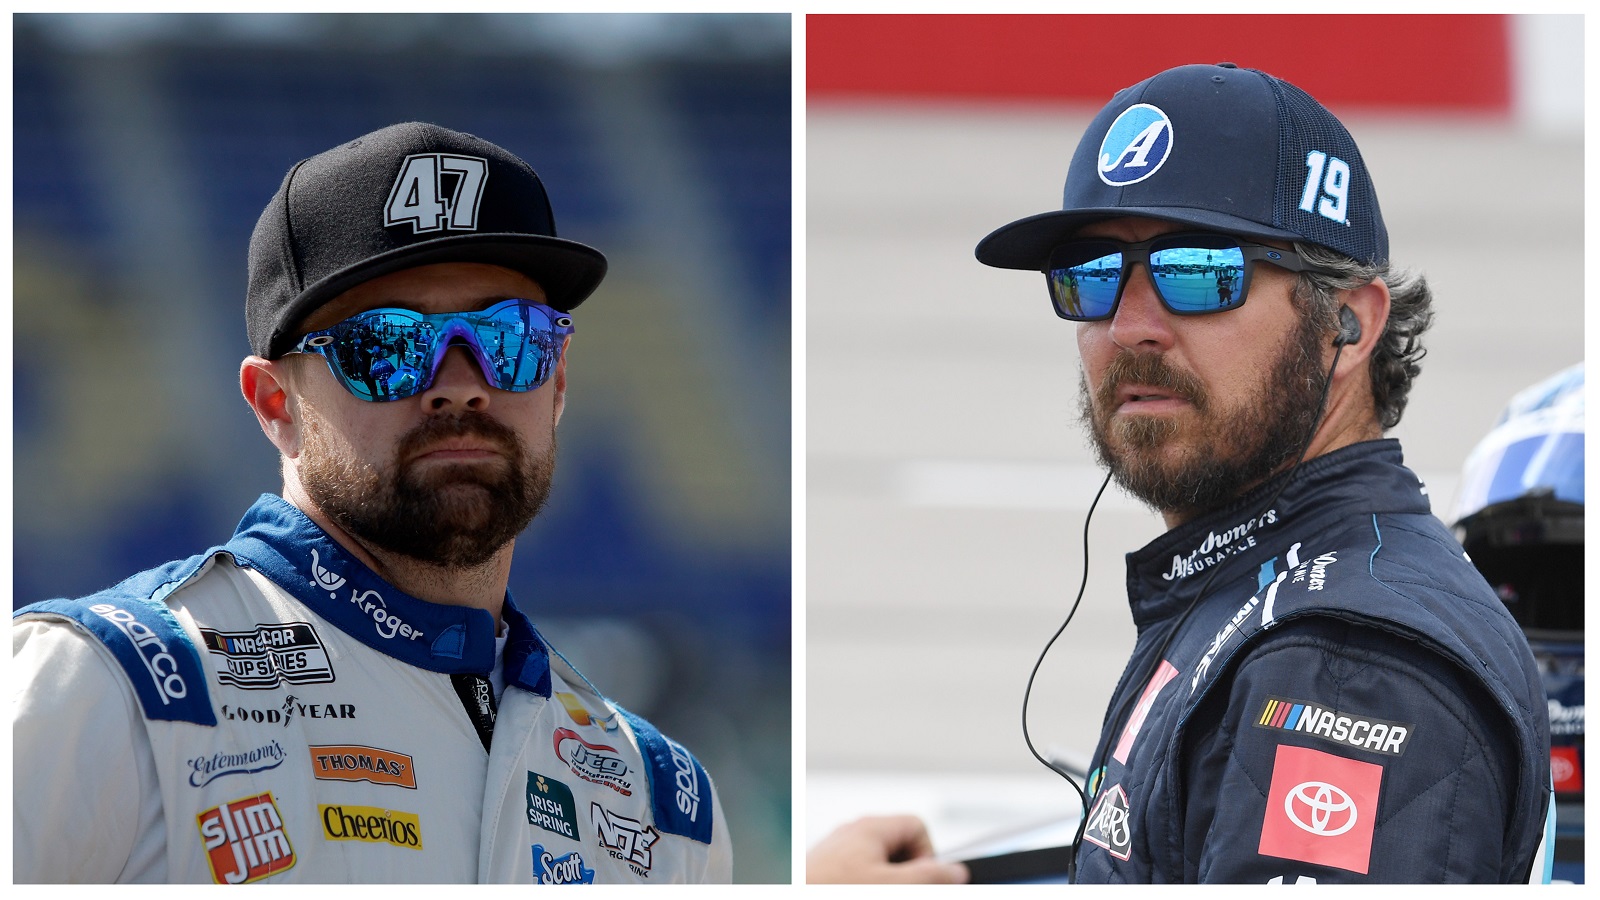 Ricky Stenhouse Jr. and Martin Truex Jr. just removed some of the suspense from NASCAR Silly Season.